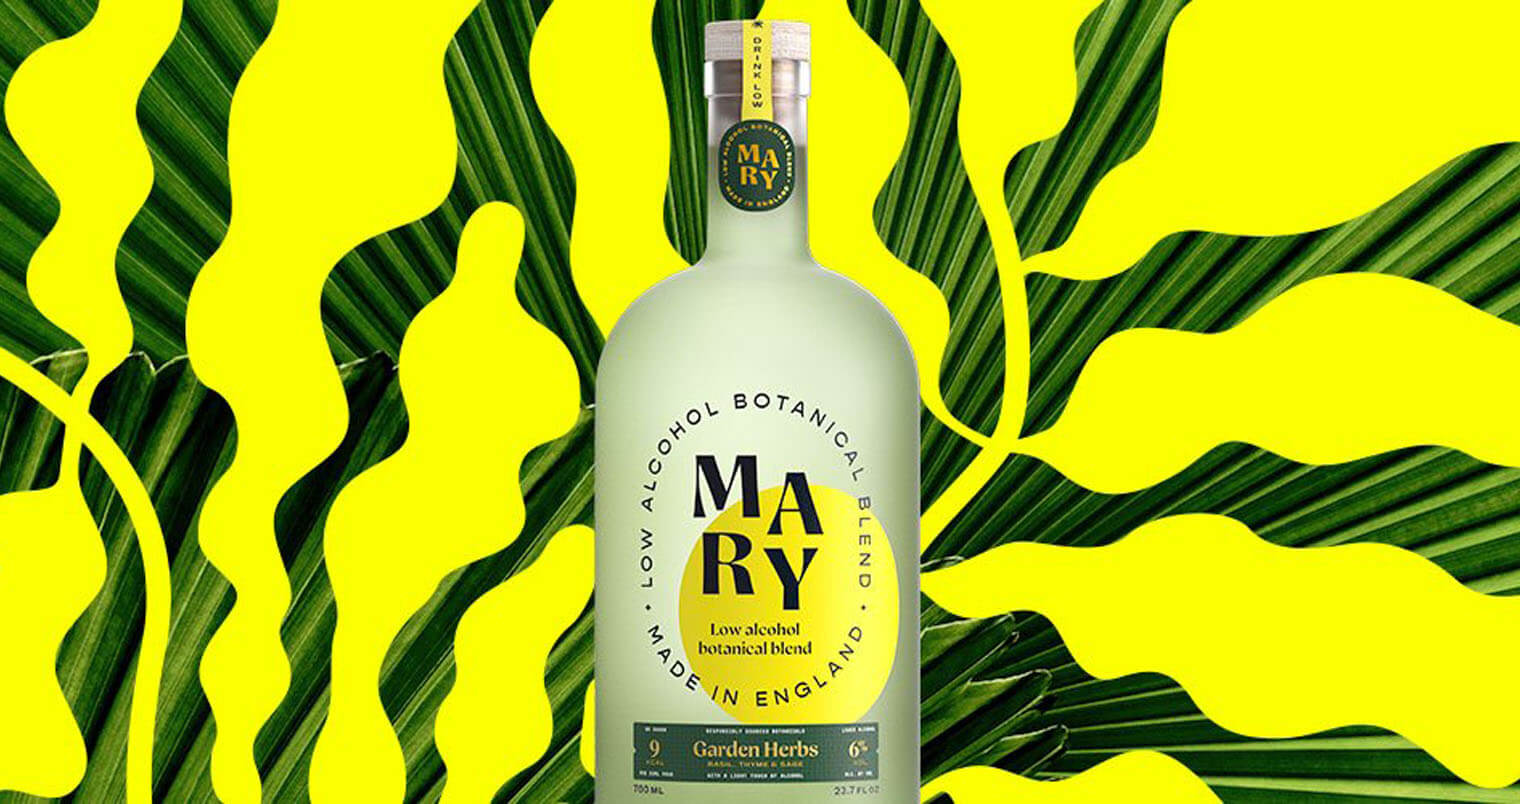 MARY by Illogical Drinks feat, featured image